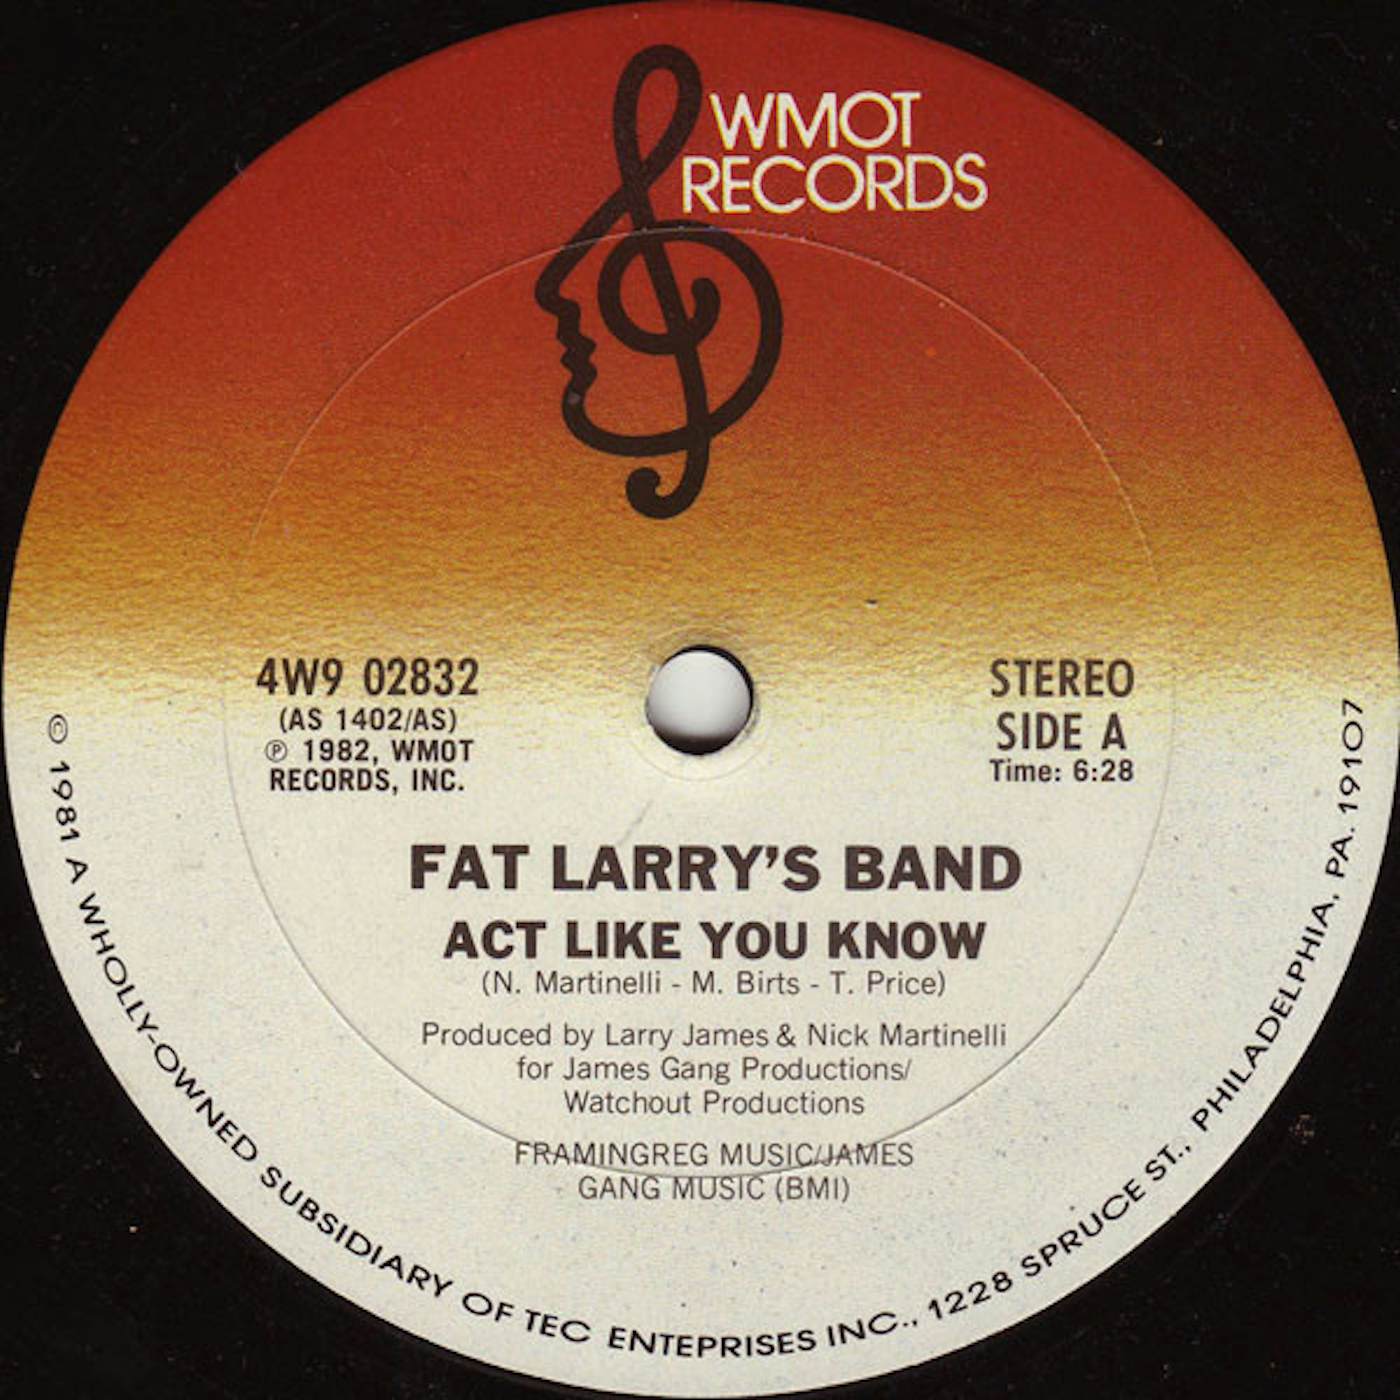 Fat Larry's Band Act Like You Know Vinyl Record